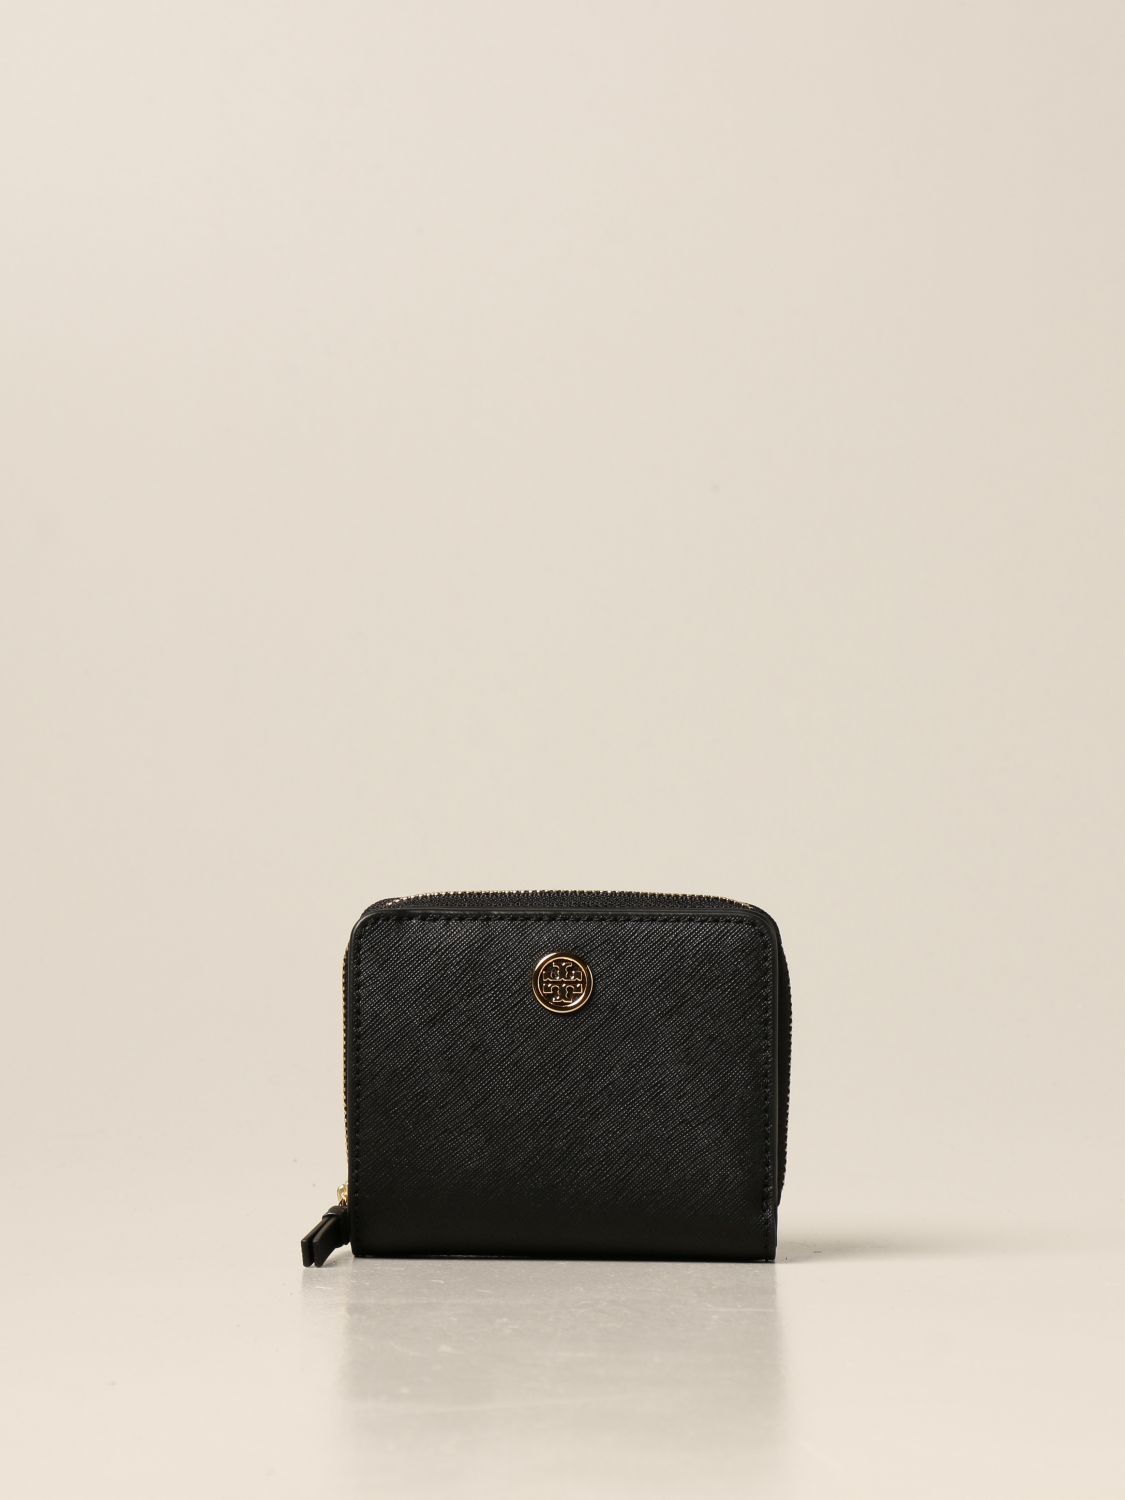 TORY BURCH: wallet in saffiano leather with metallic emblem - Black